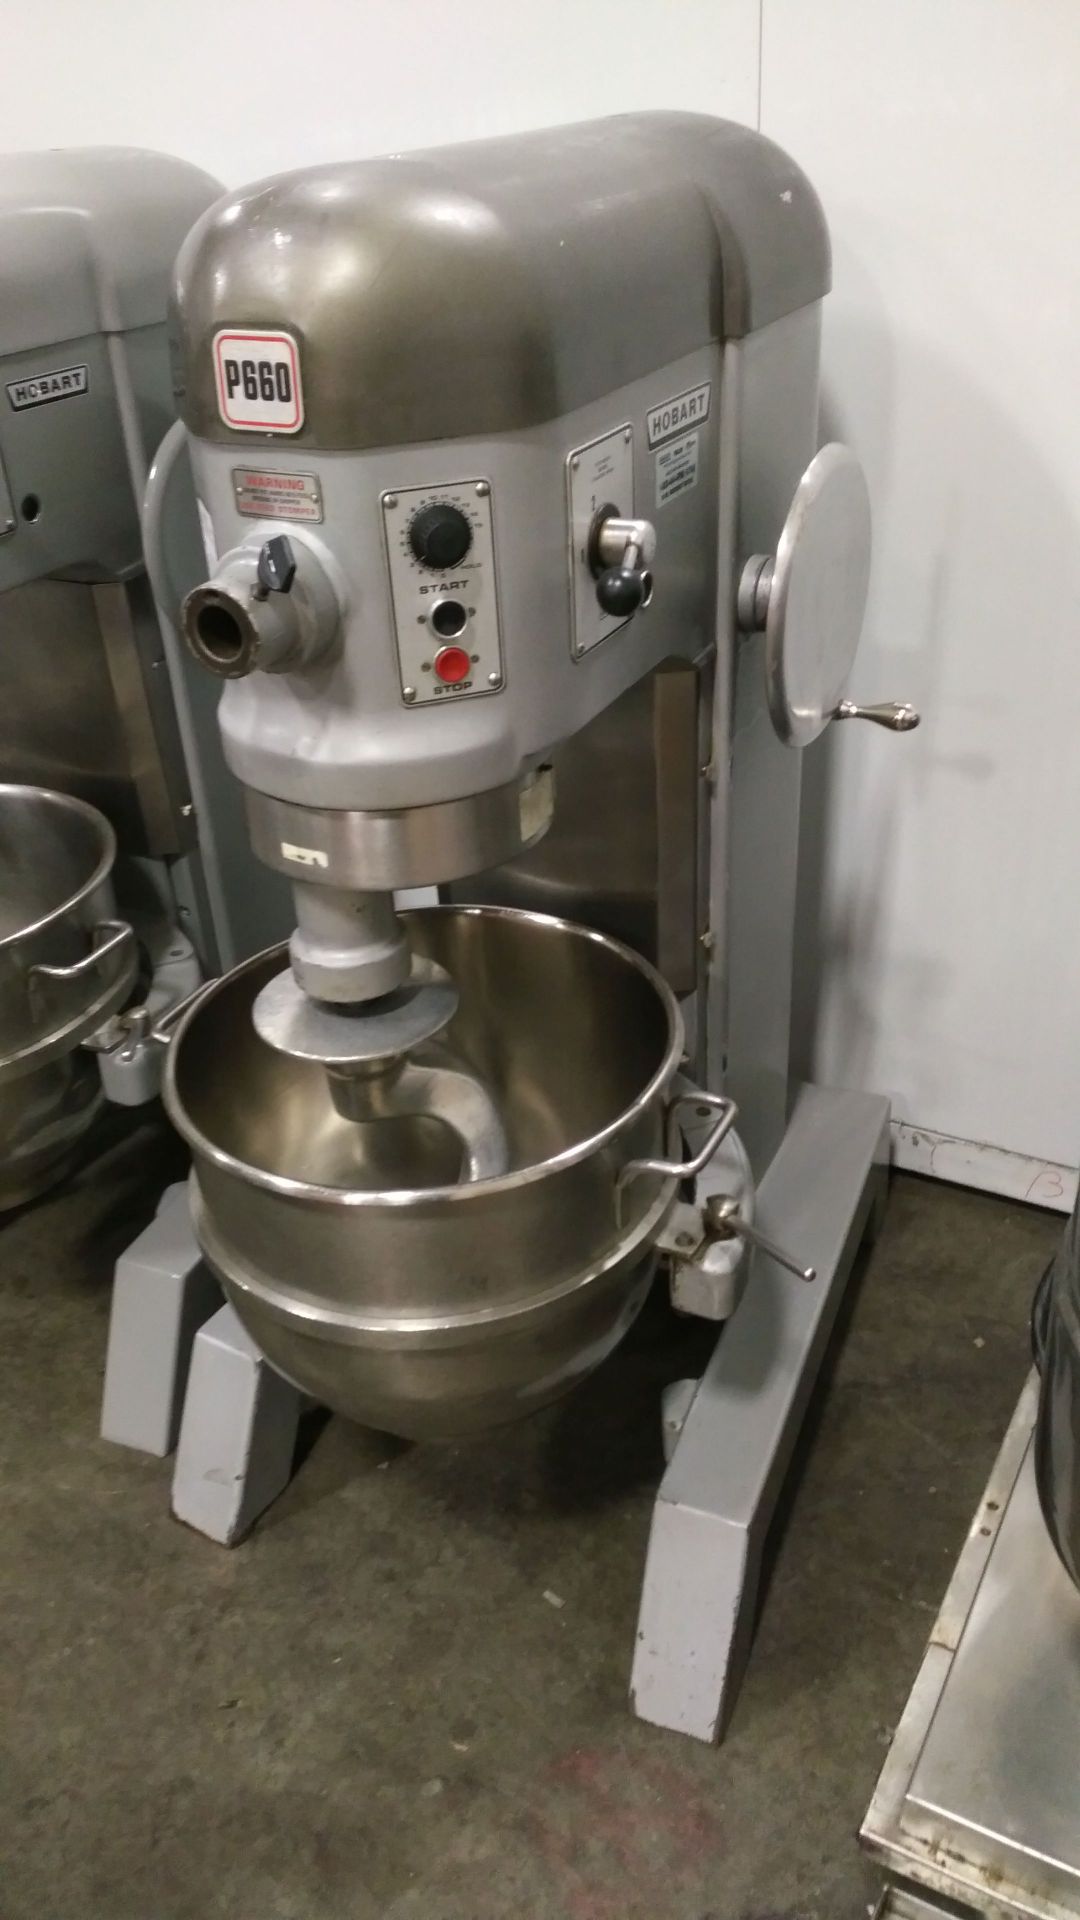 Hobart P660 Mixer with Bowl/Hook - 3 Phase